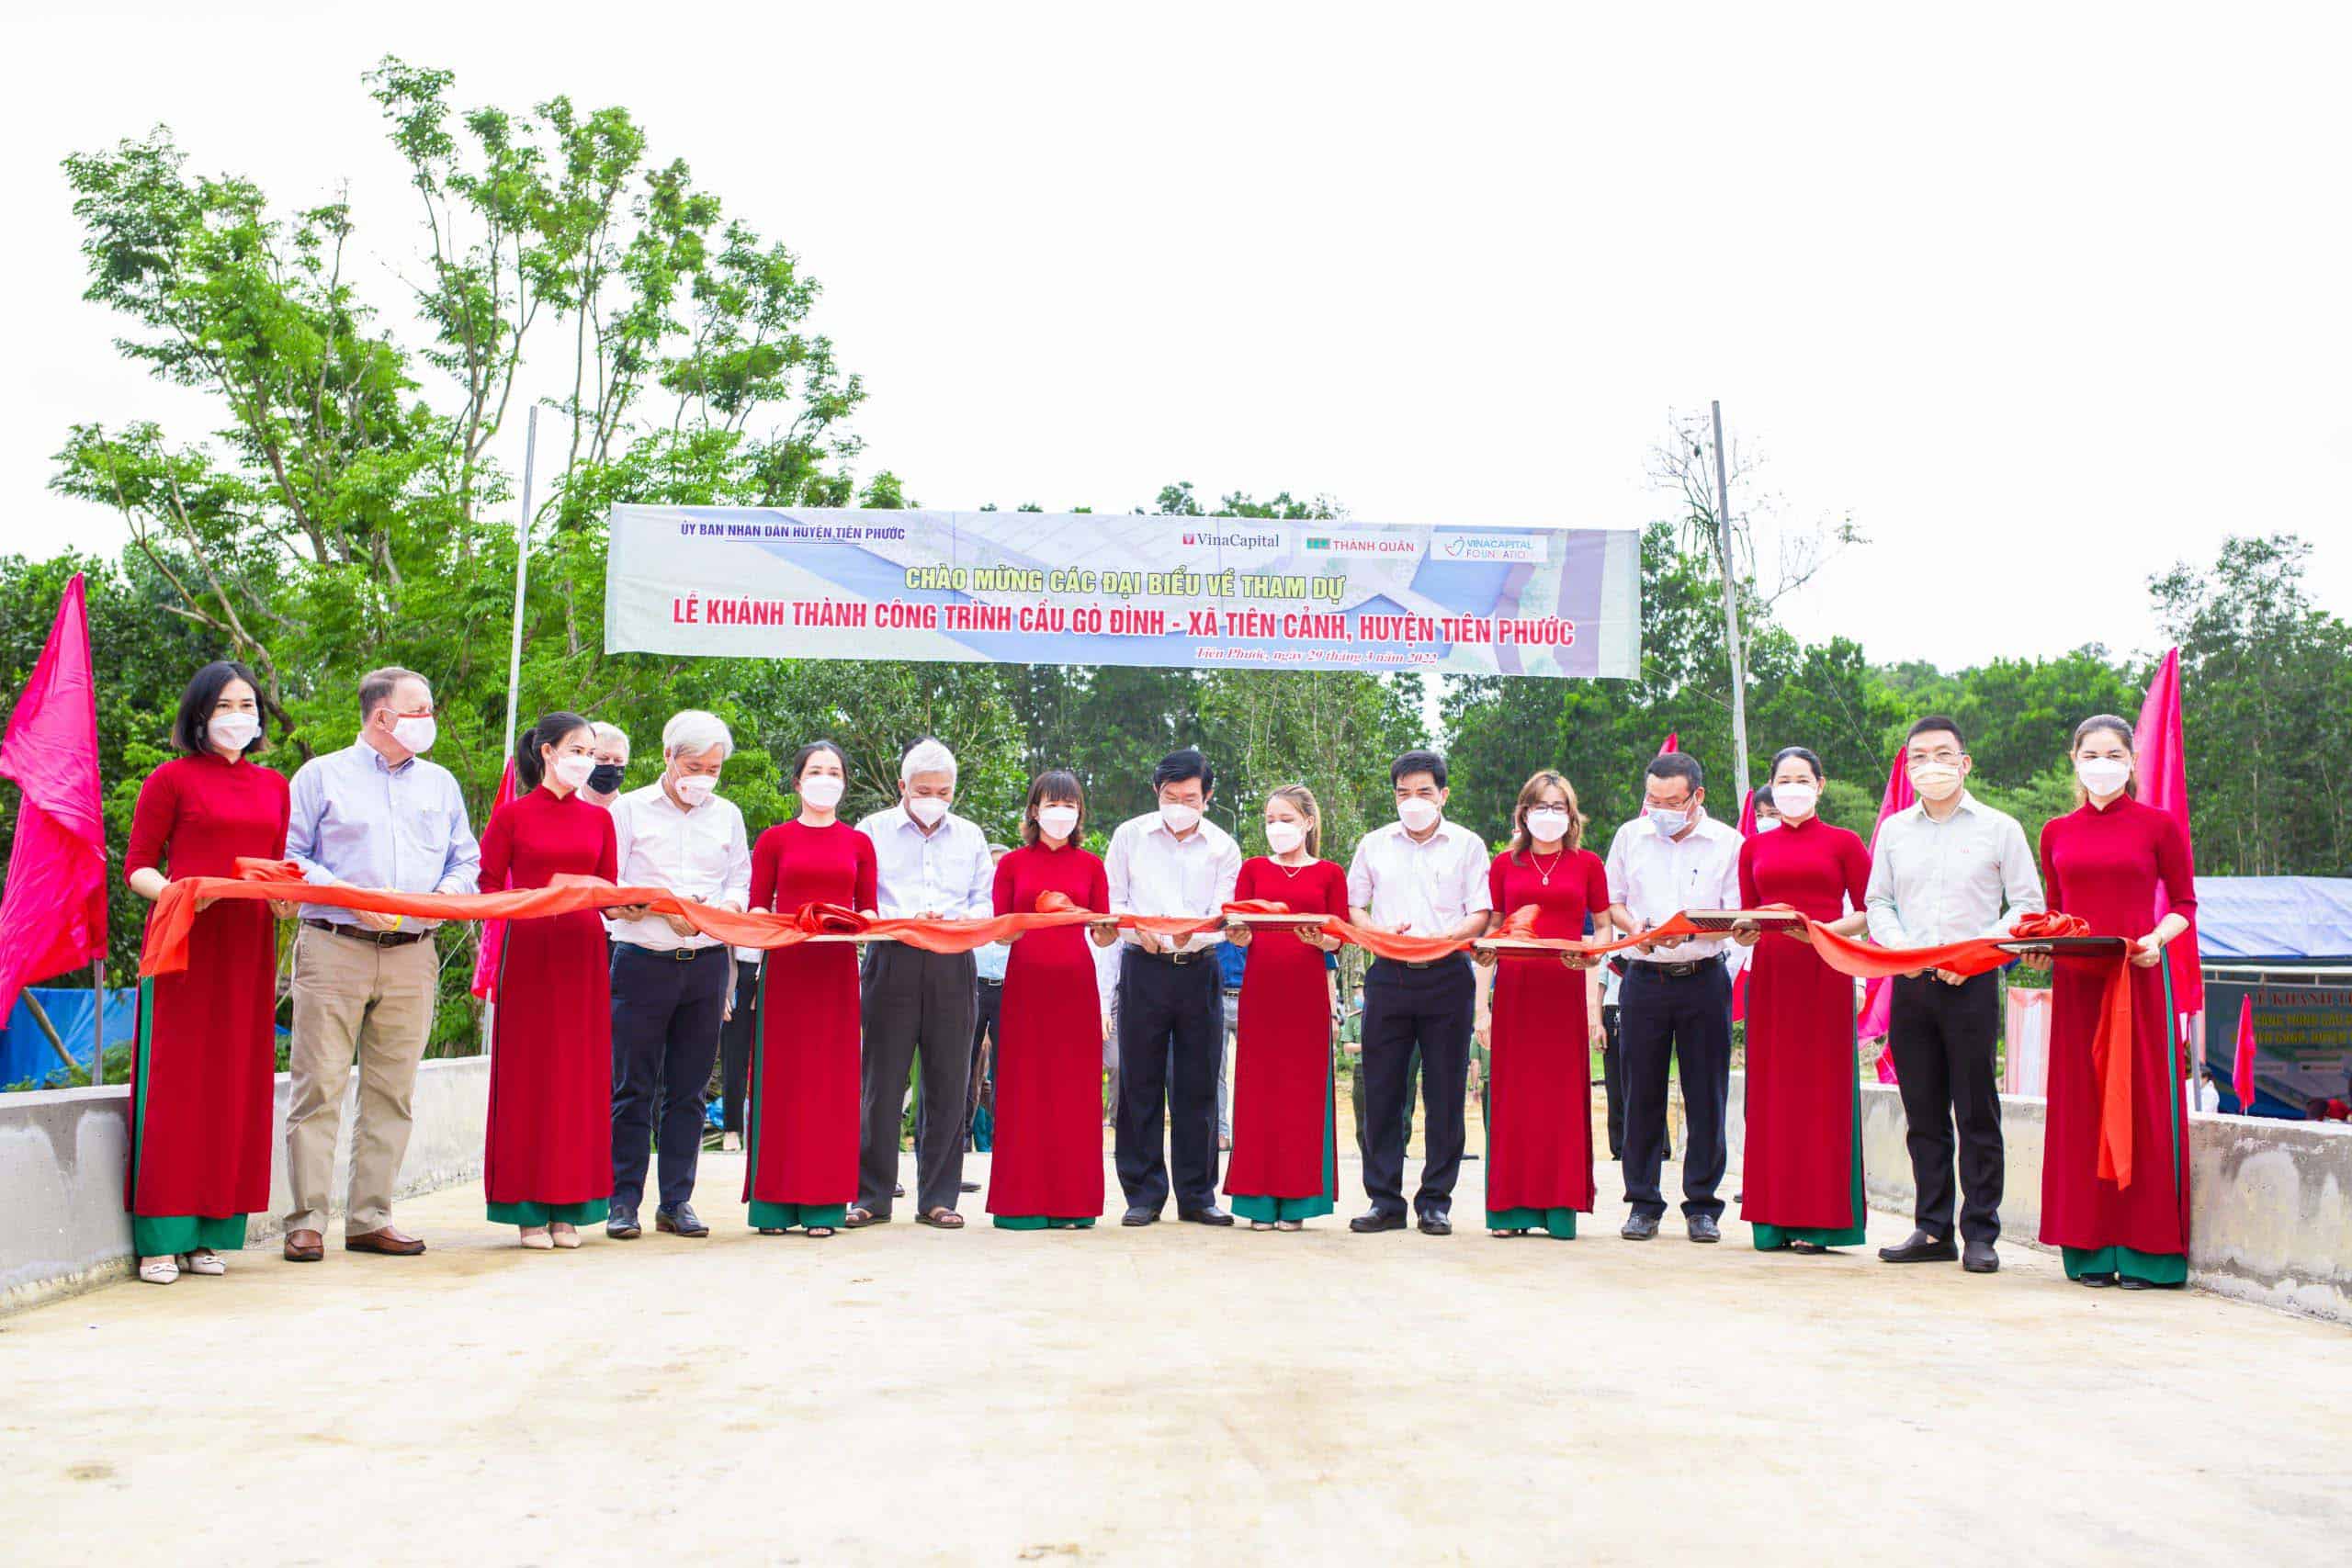 VinaCapital Foundation inaugurates the Go Dinh Bridge in Tien Phuoc District, Quang Nam Province with the presence of Mr. Truong Tan Sang - Former President of Vietnam